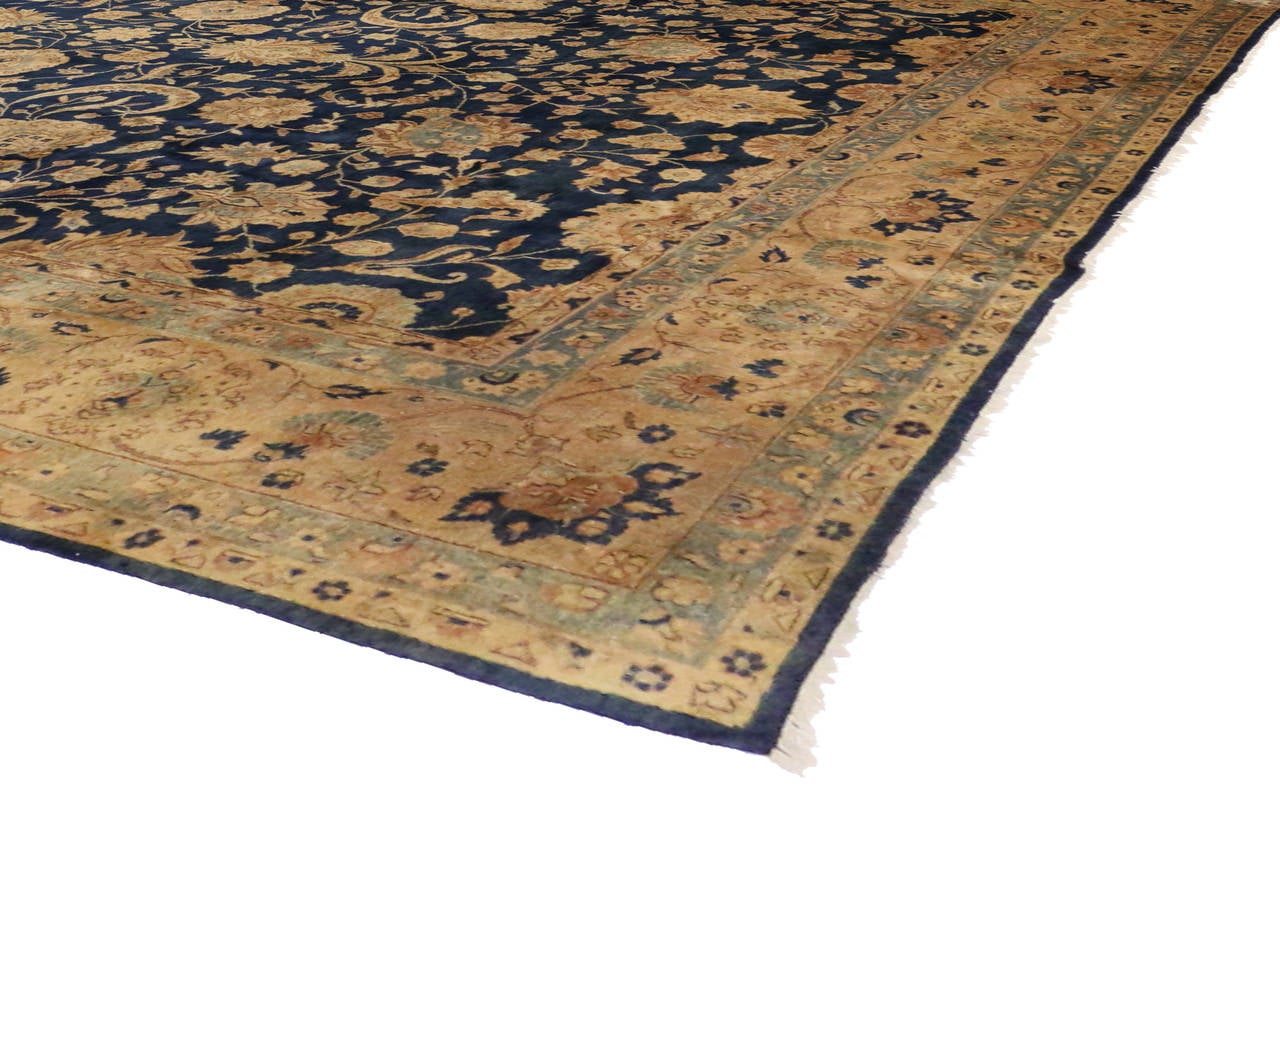 Hand-Knotted Antique Indian Agra Rug with Hollywood Regency Style